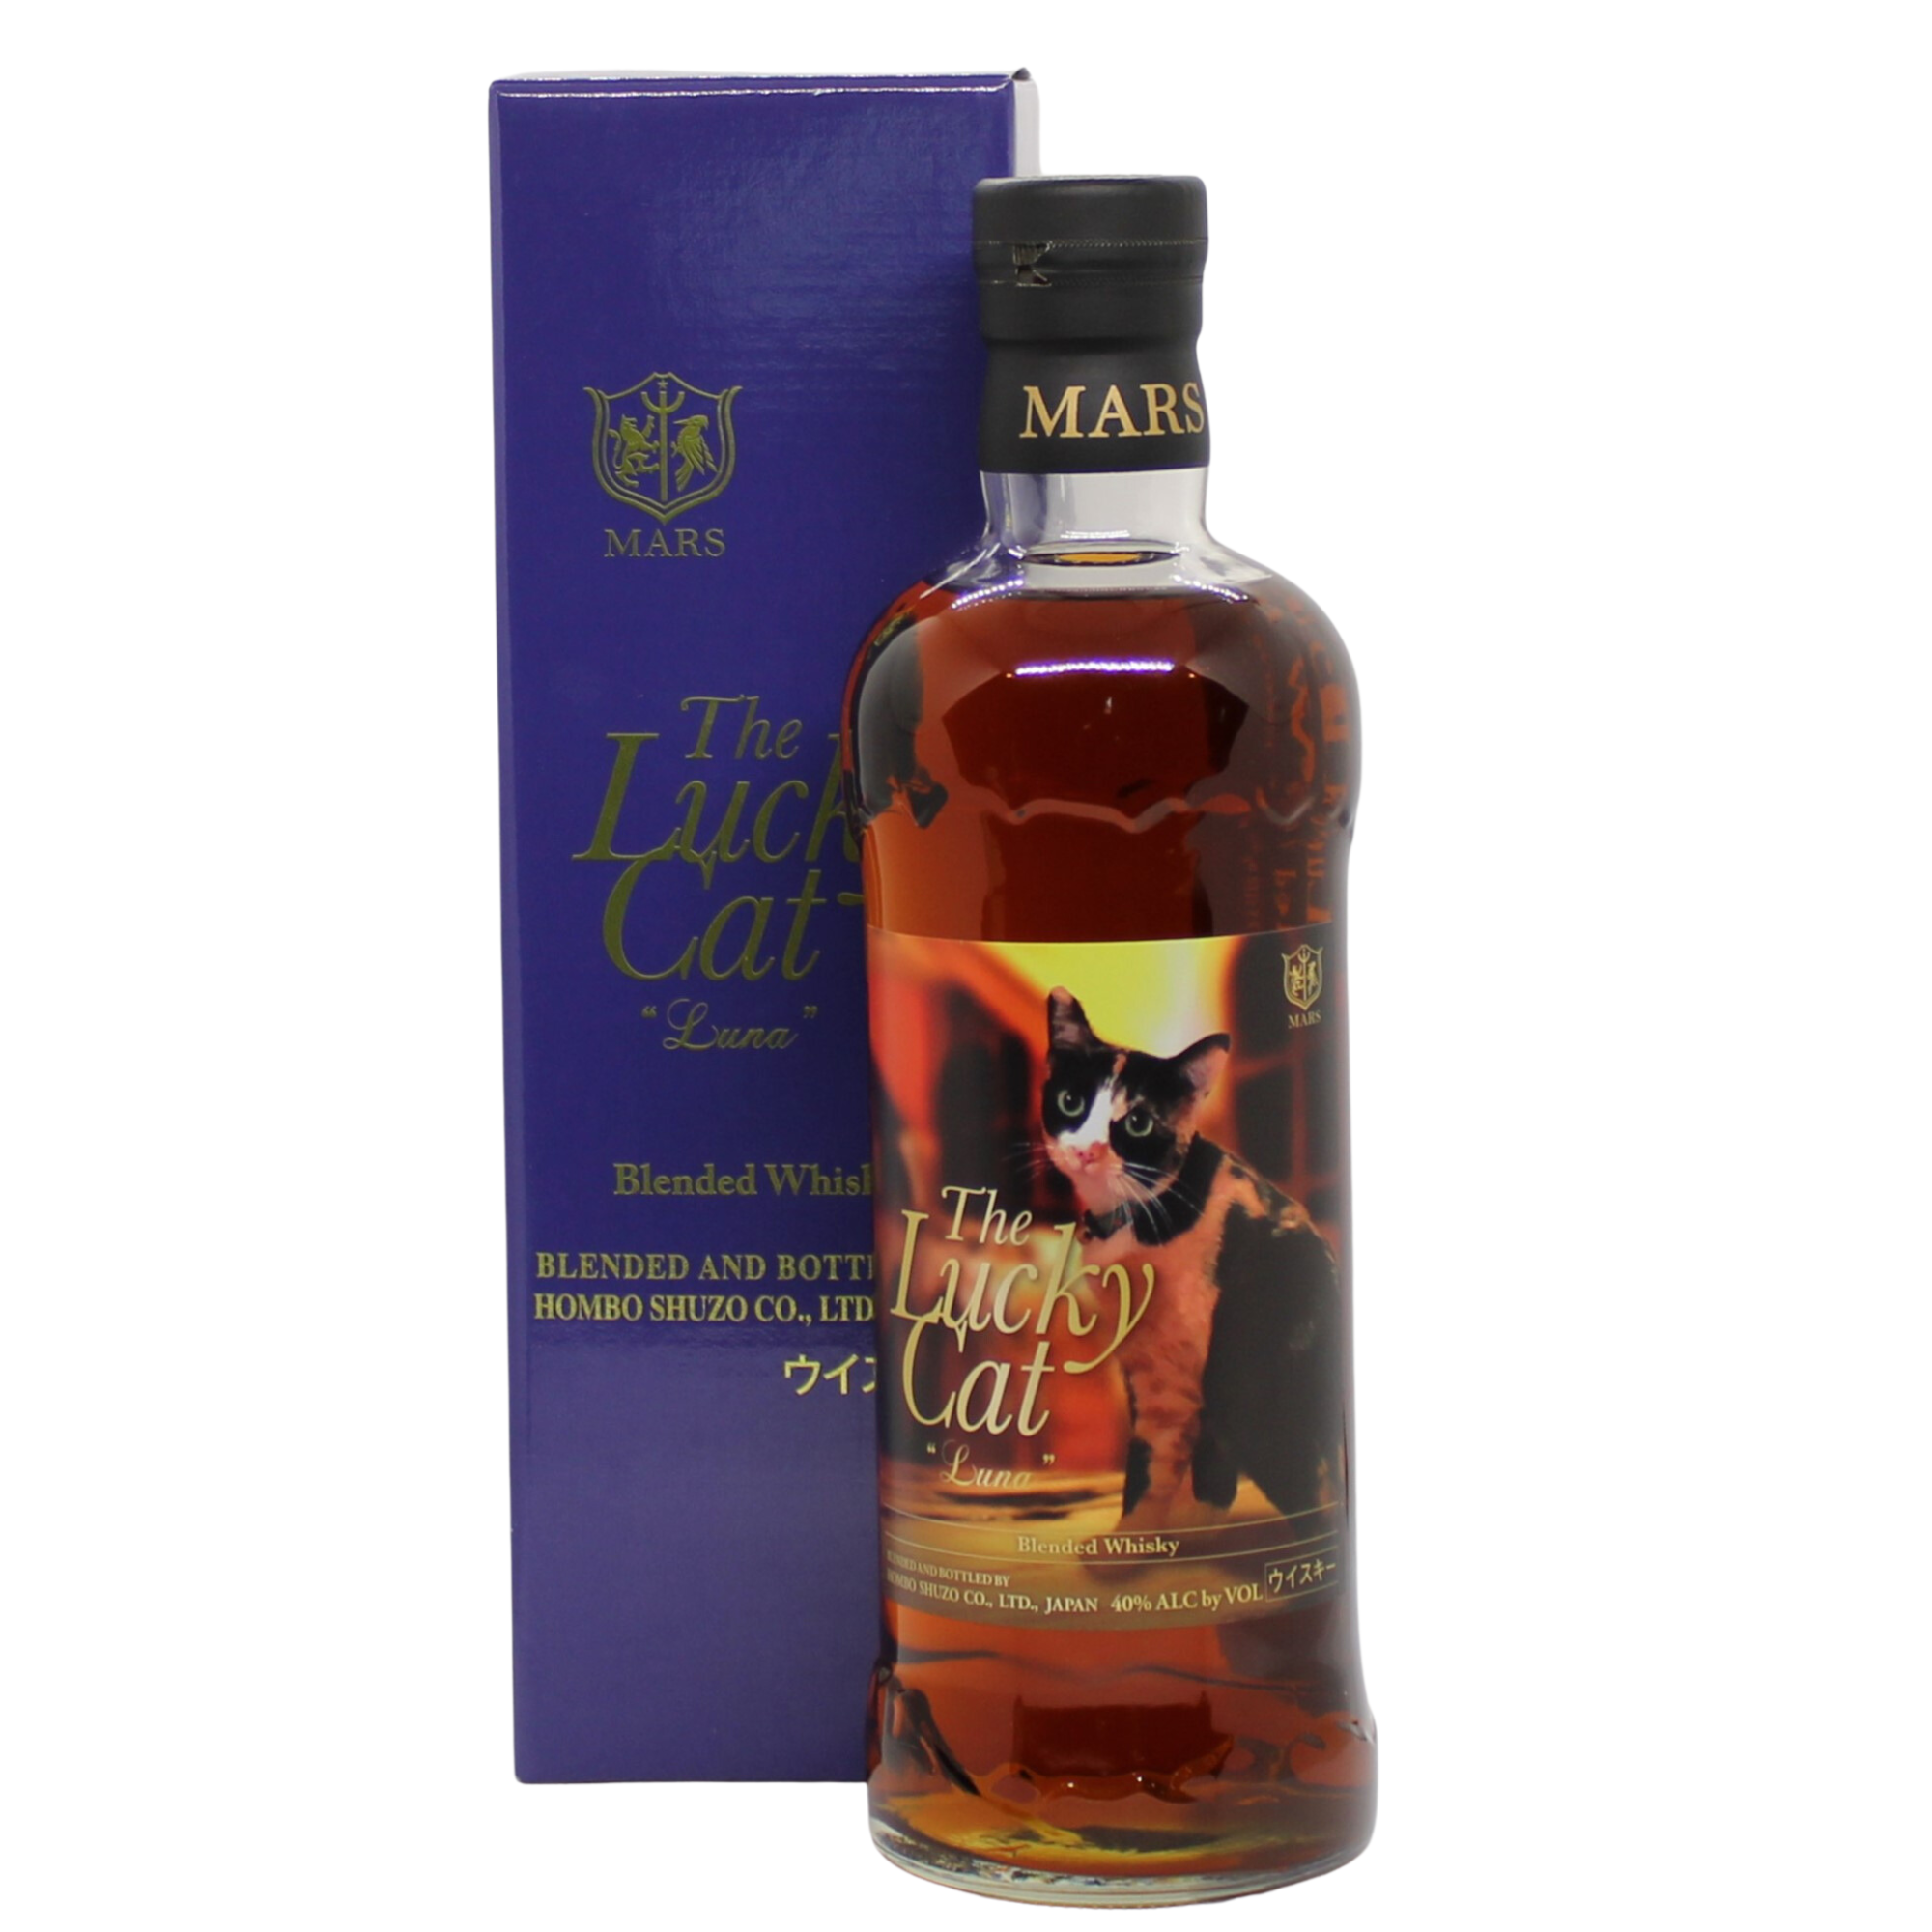 The Lucky Cat “Luna” is the seventh edition of the “The Lucky Cat” series – a blended whisky created using Mar’s whisky blending techniques.